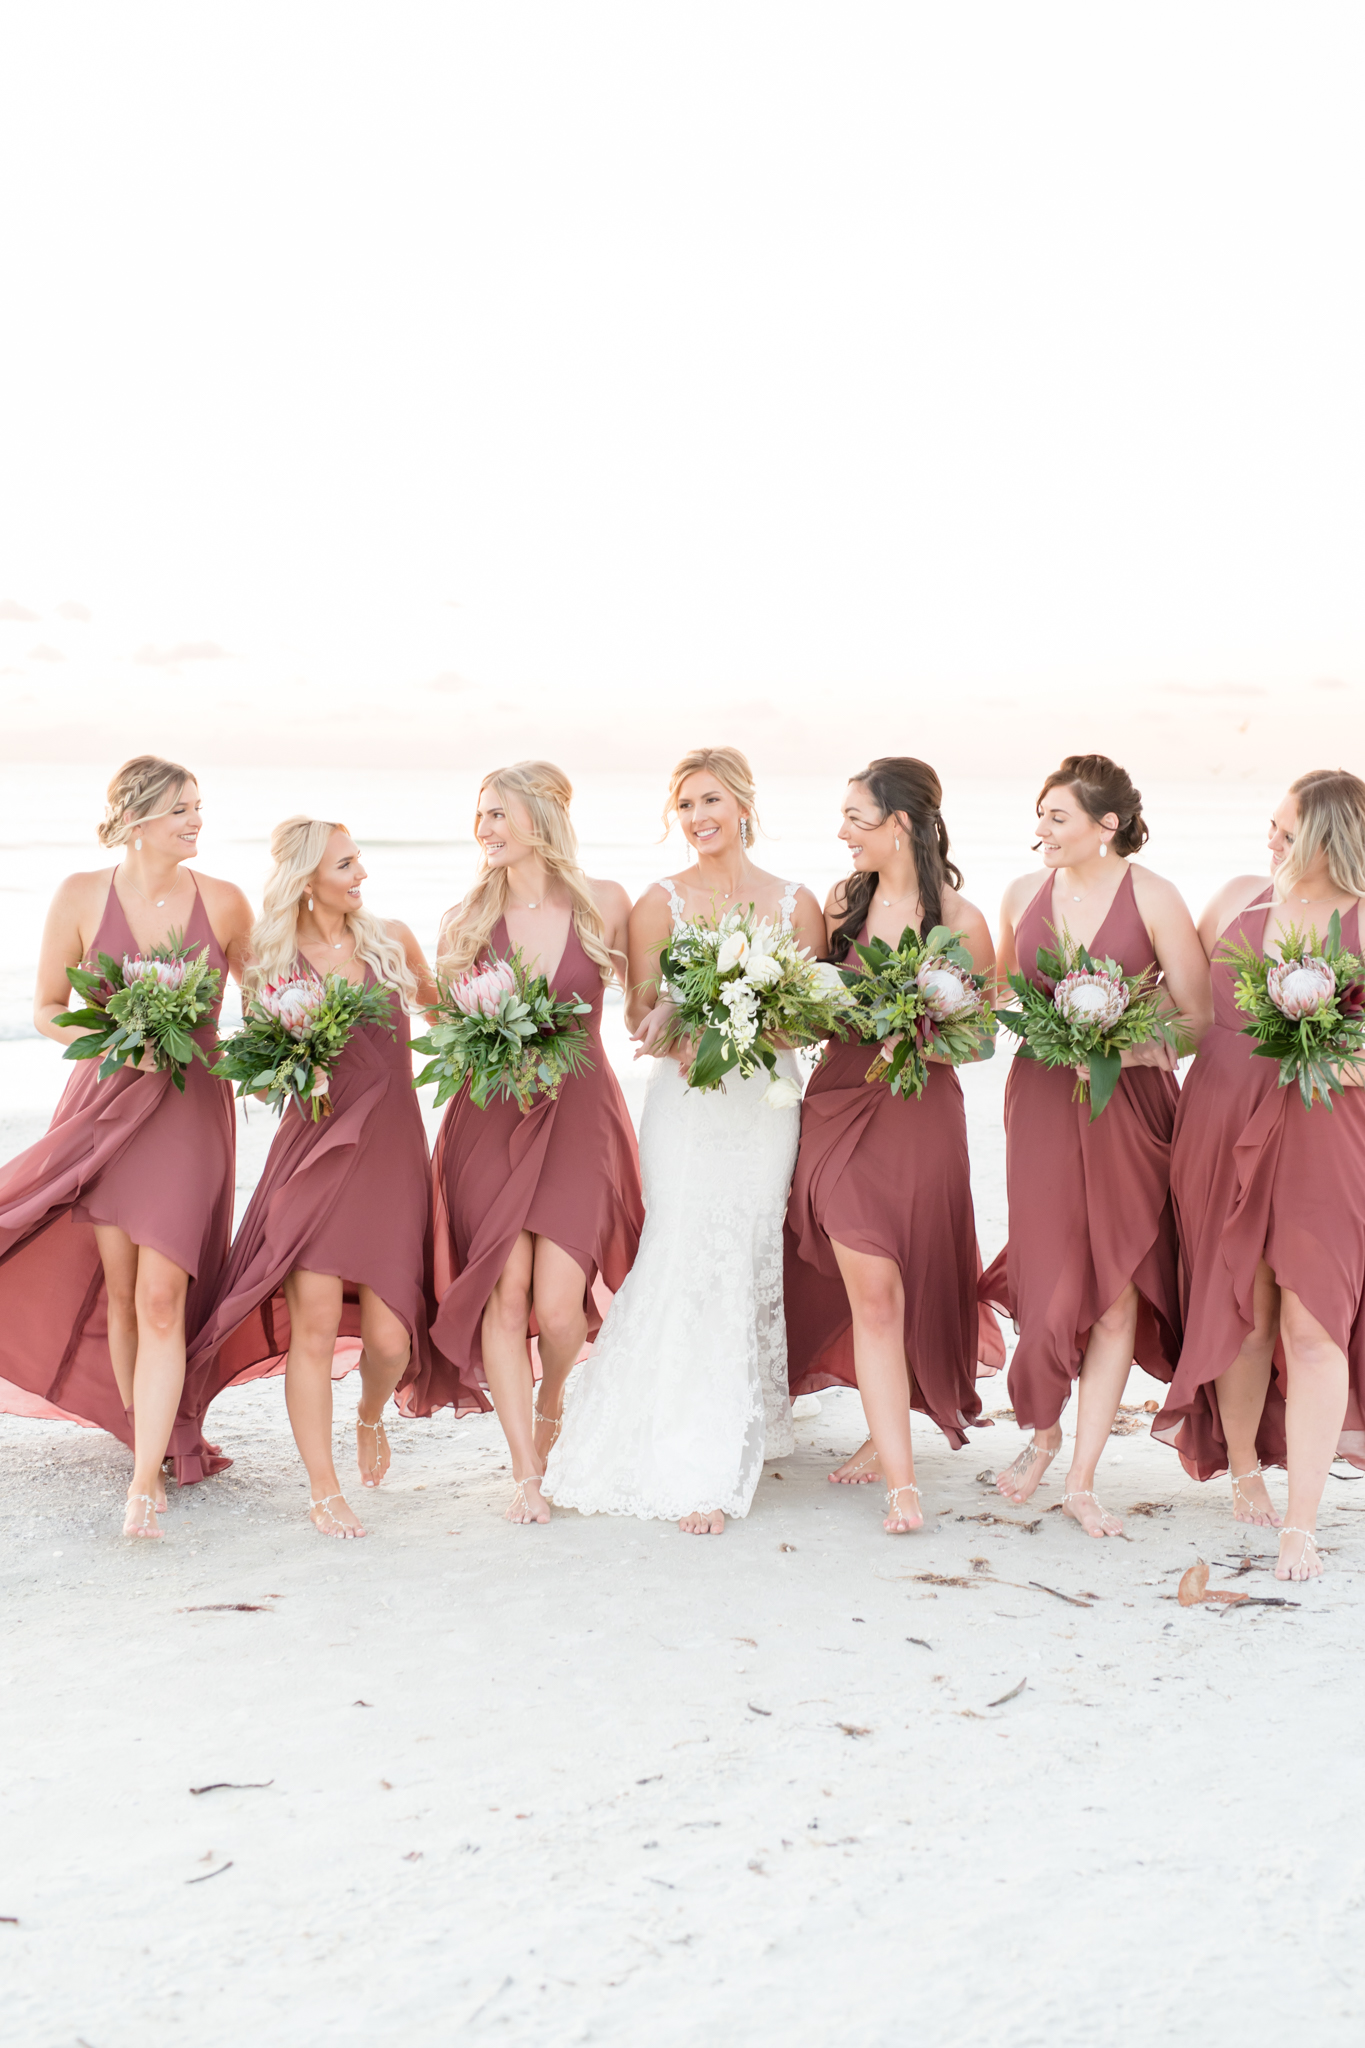 Bride and bridesmaids walk together and laugh.